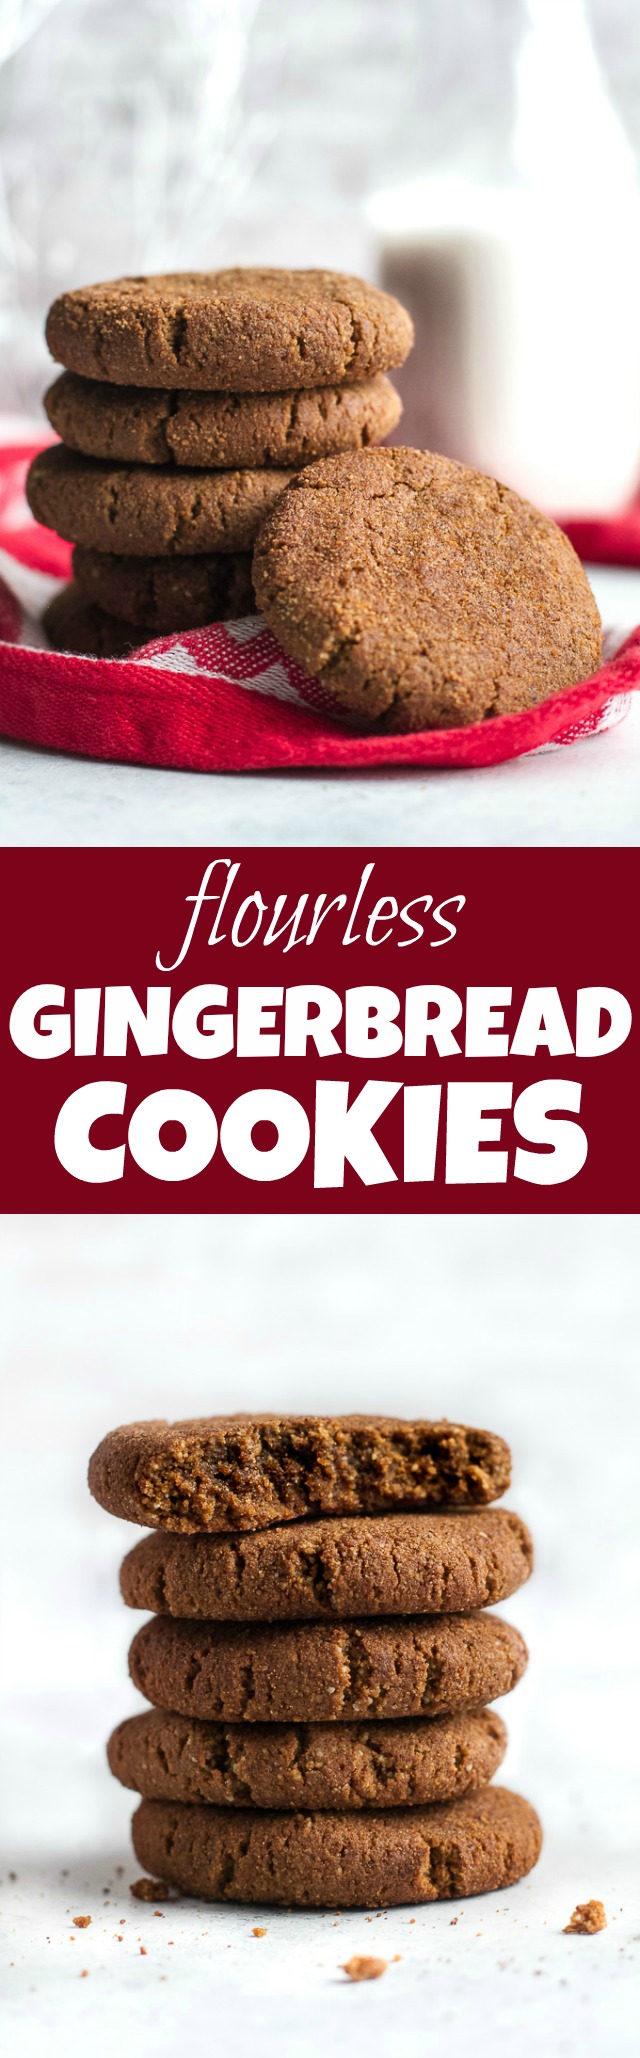 Flourless gingerbread cookies that are soft, chewy, and super easy to make with only ONE BOWL and a handful of healthy ingredients {paleo, gluten-free, refined-sugar-free} | runningwithspoons.com